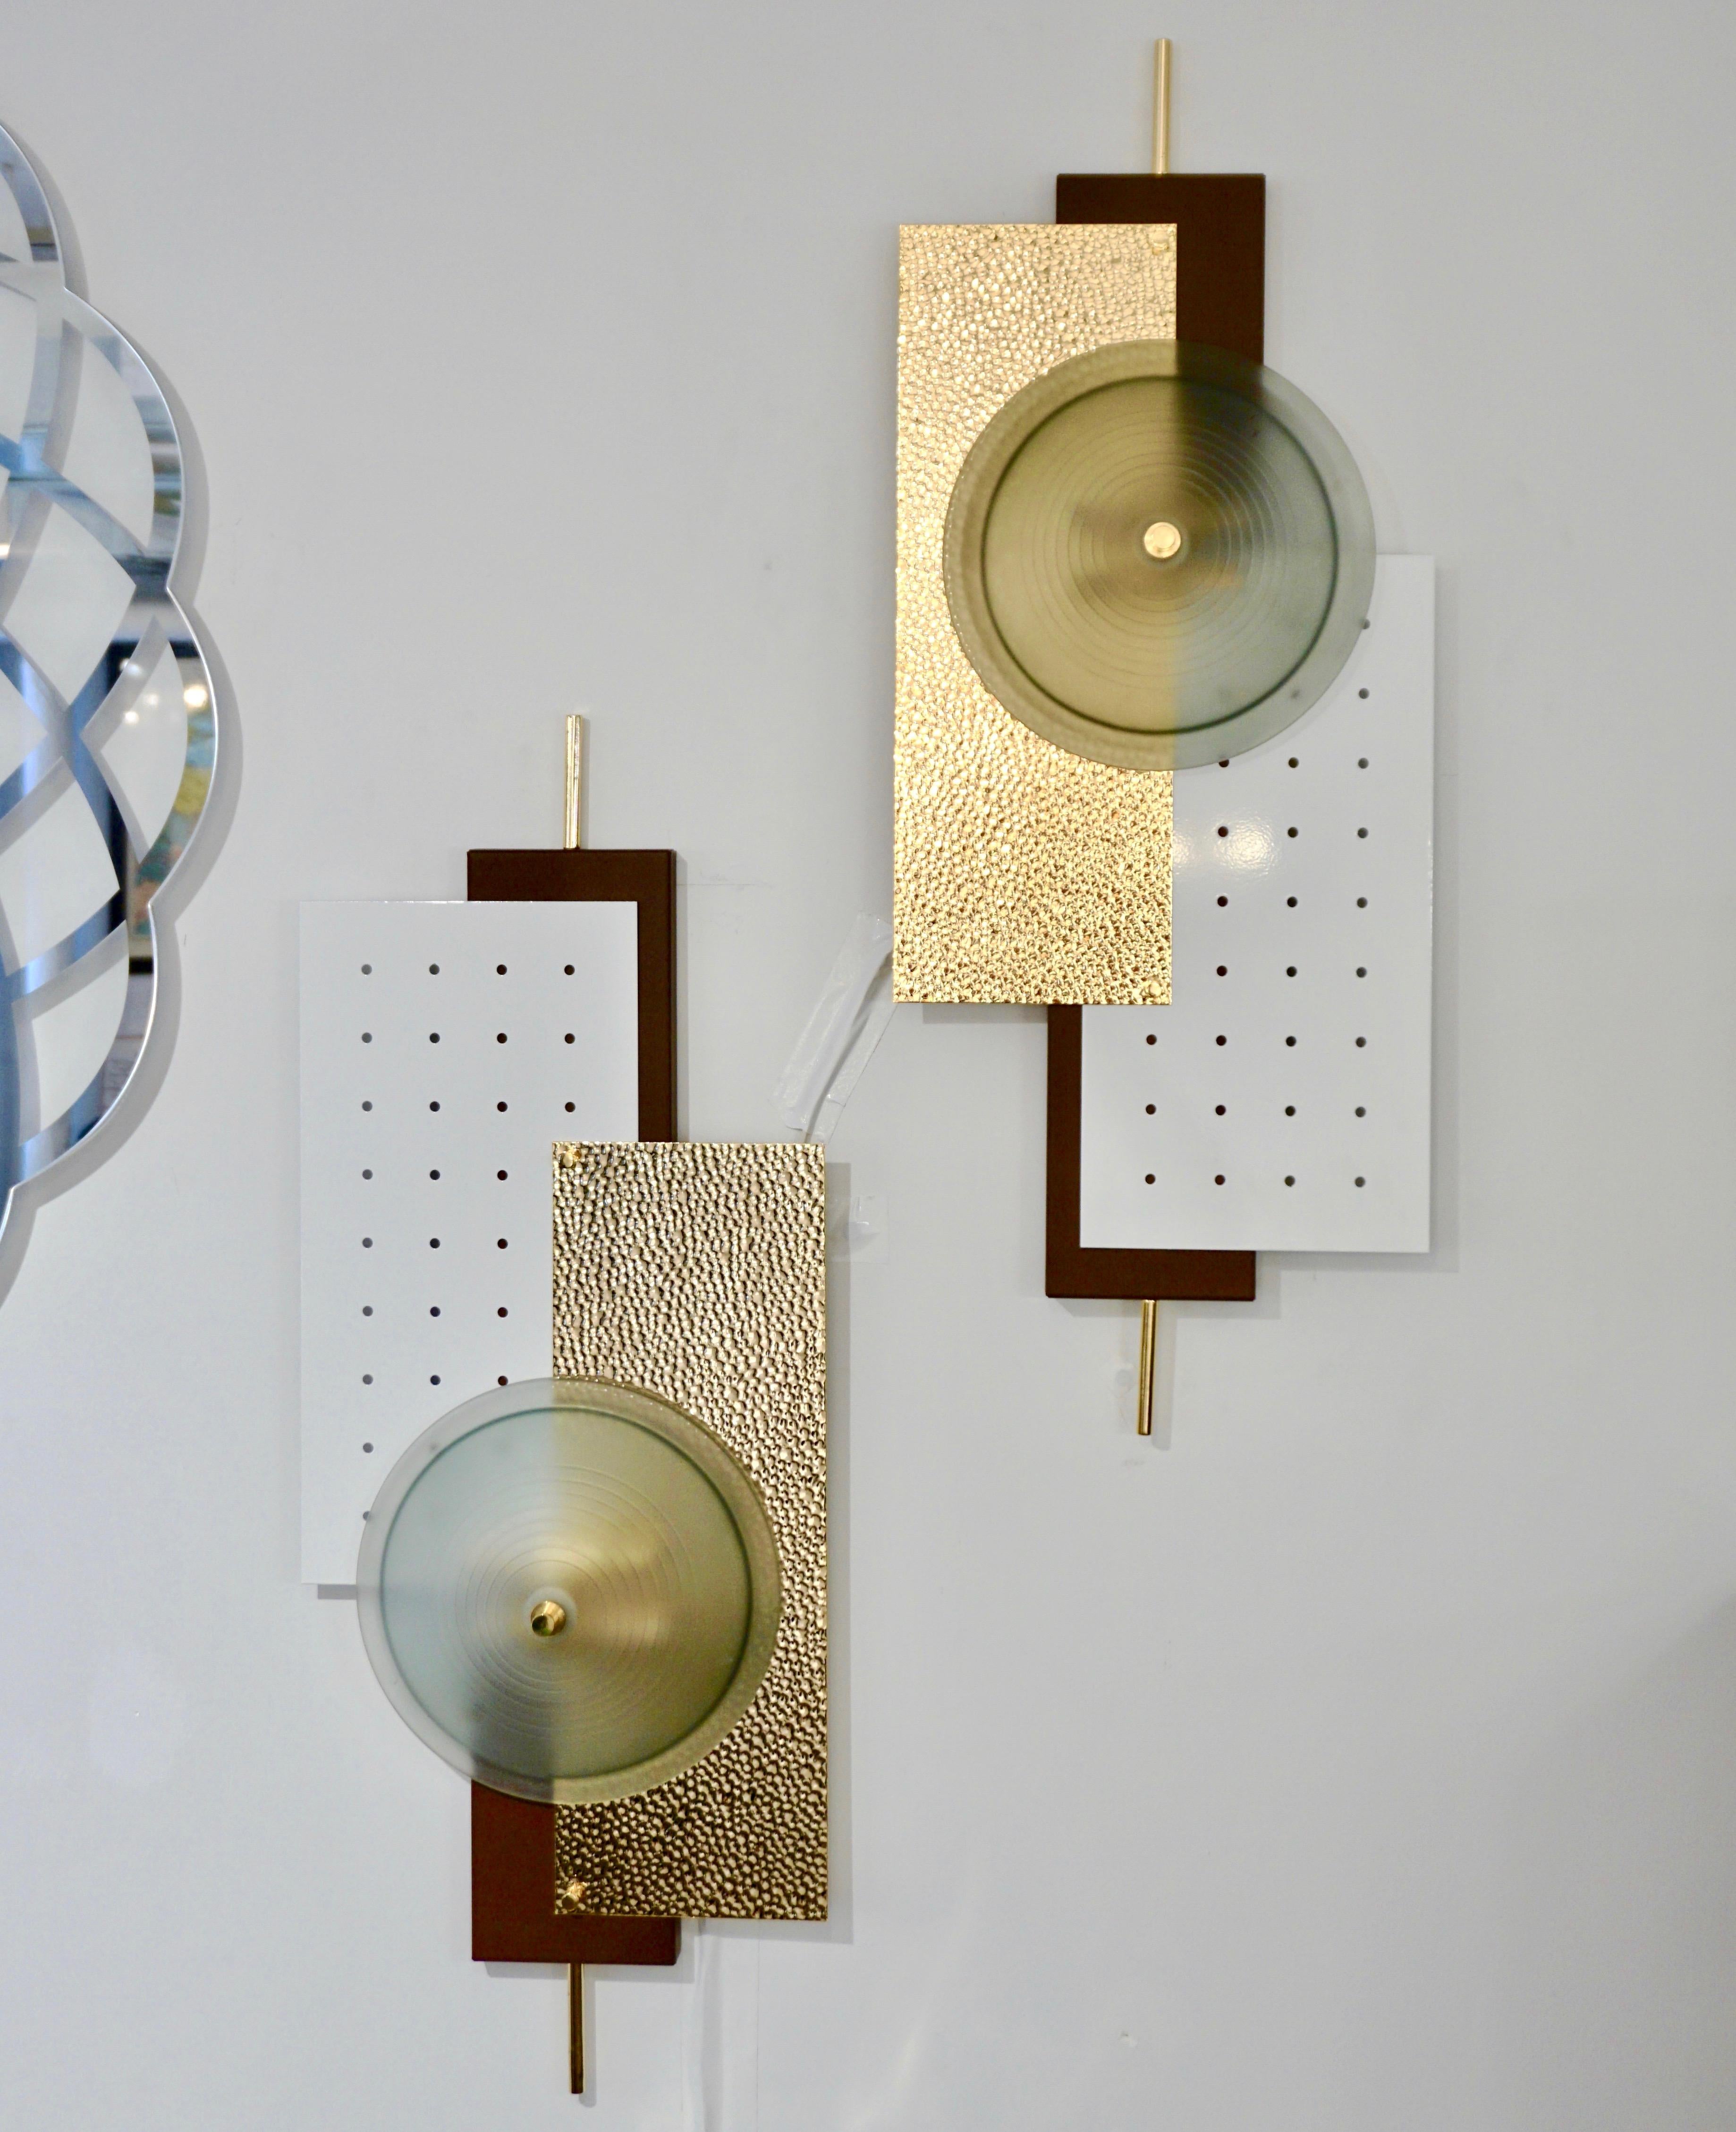 Contemporary pair of Italian wall lights inspired by the Memphis-style geometric shapes and differing colors. A very modern sleek design, with an accent on textures, consisting of offset rectangular metal shapes, one in perforated metal cold painted